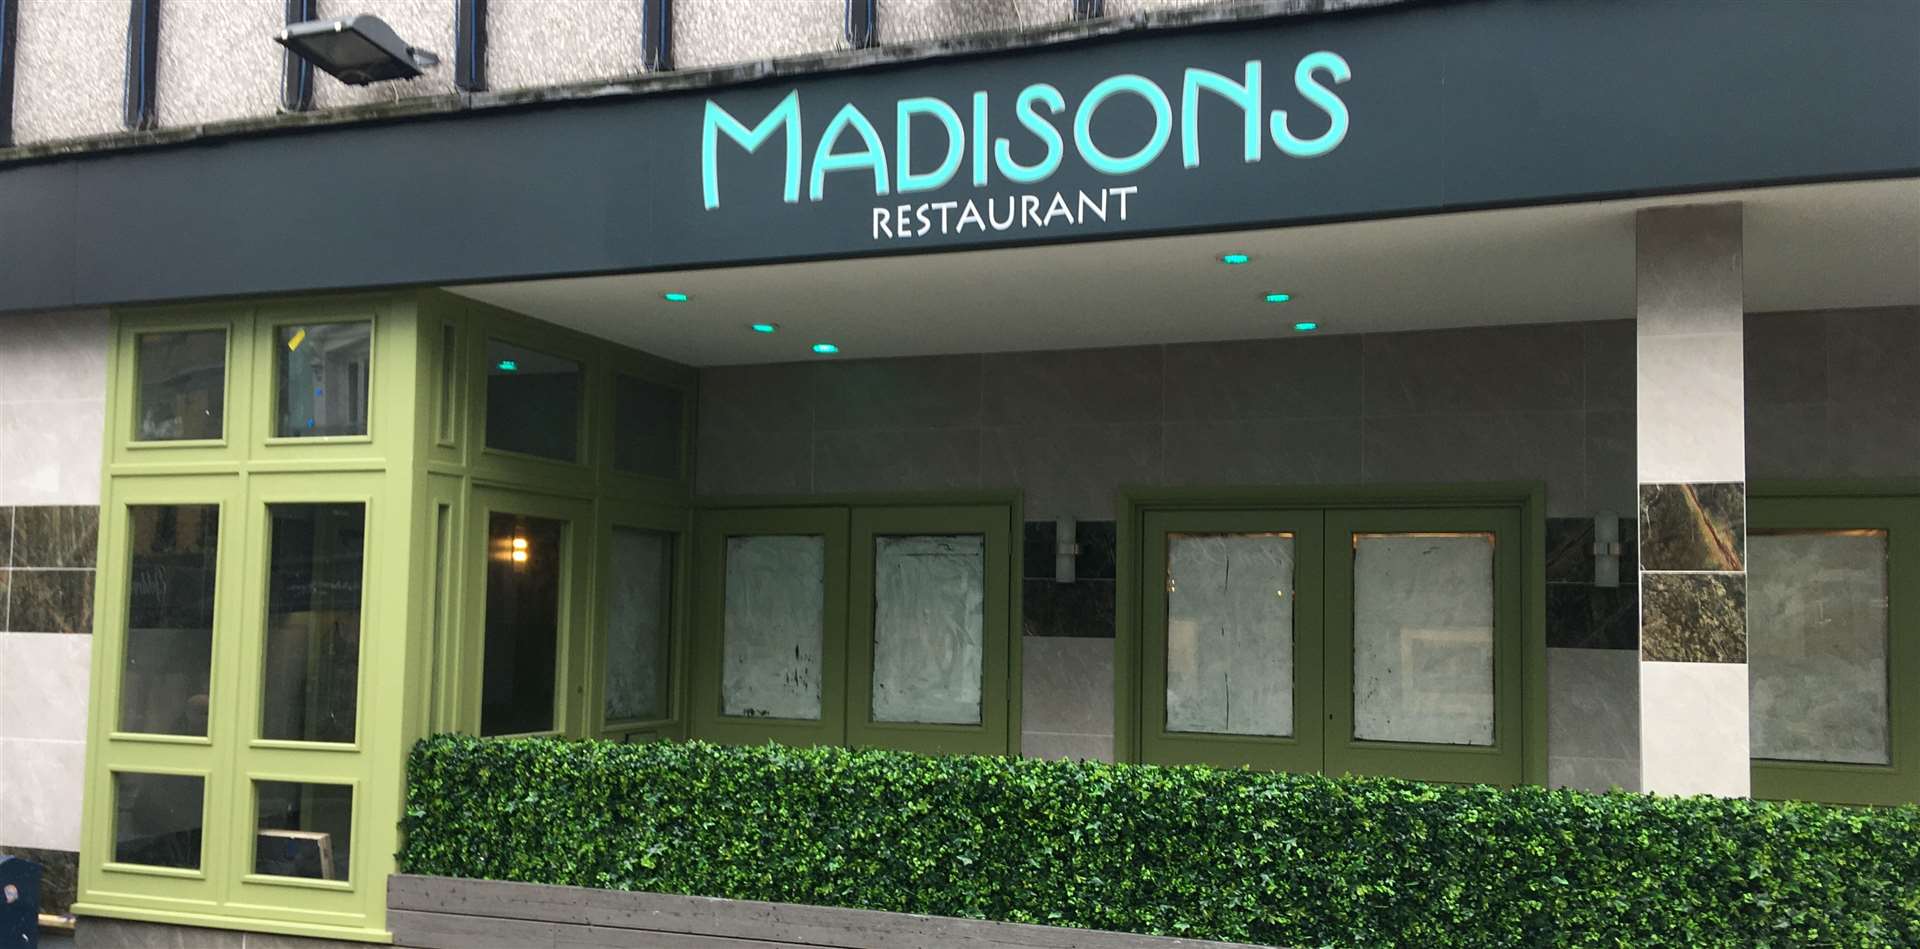 Madisons in Gabriel's Hill, Maidstone